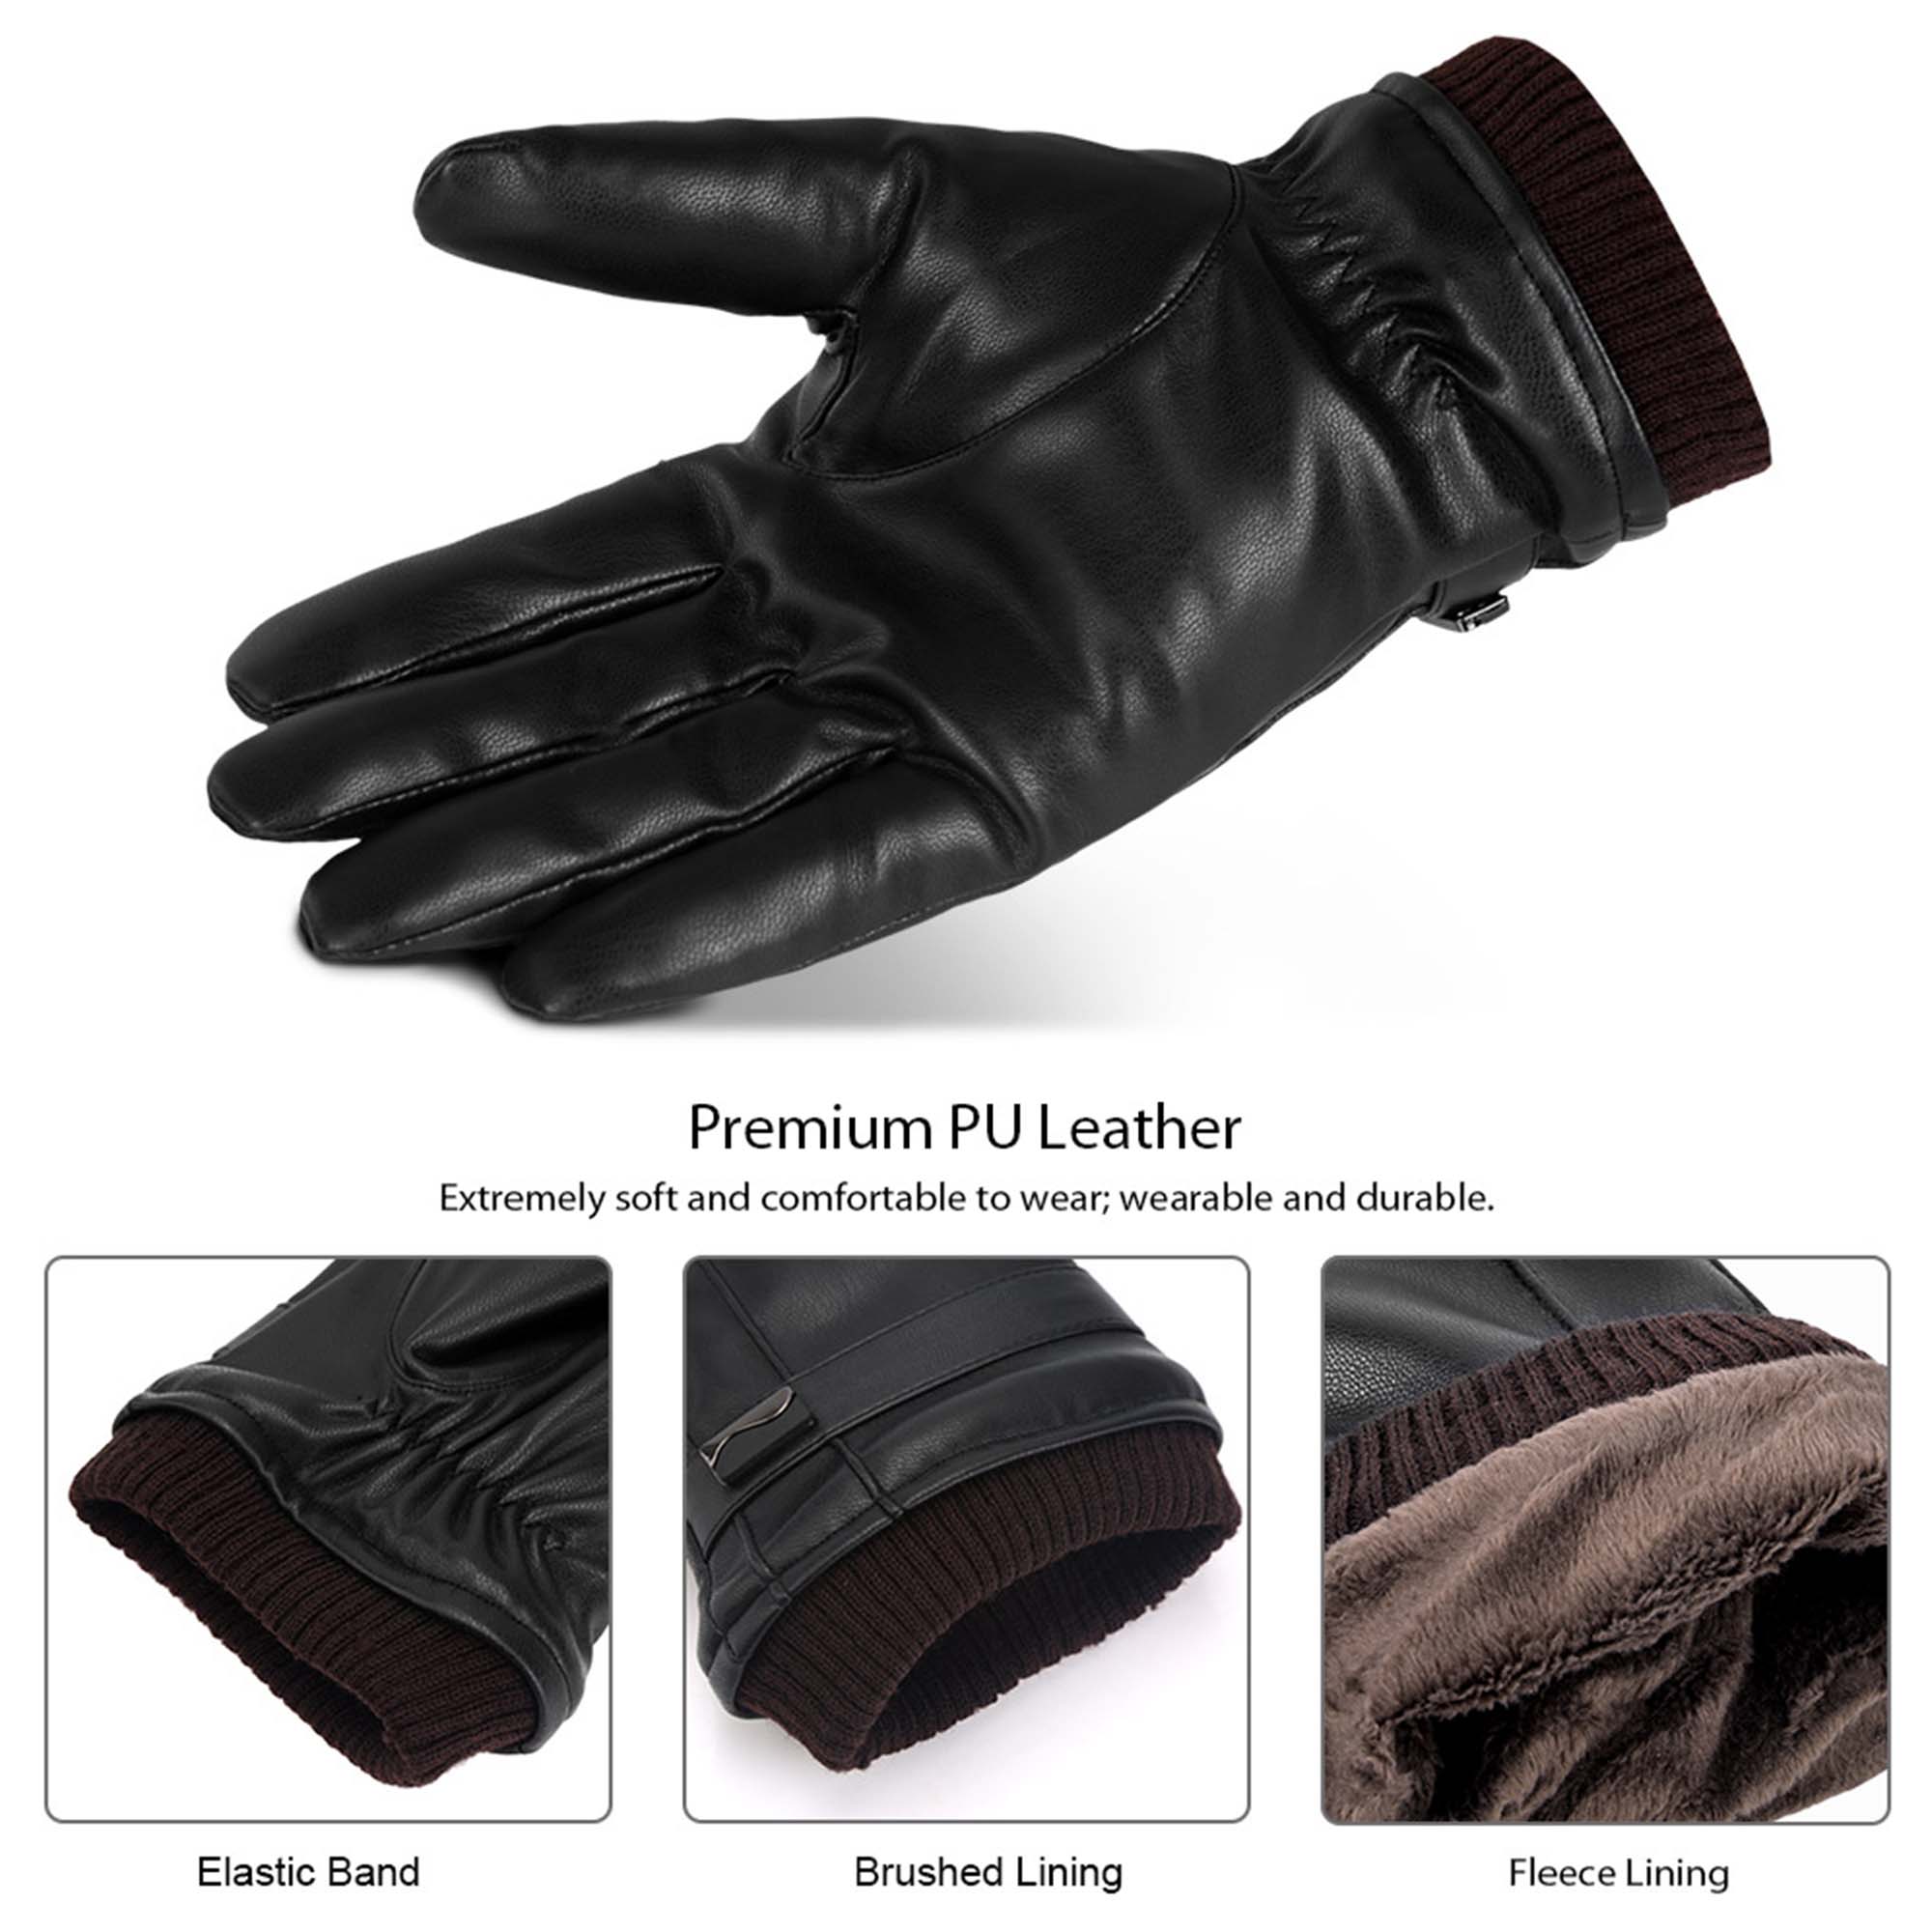 Winter Gloves for Men Windproof Men PU Leather Gloves, Warm Anti-slip Touchscreen Gloves Cold Weather Gloves for Hiking Cycling Skiing Running, Black & L - image 5 of 9